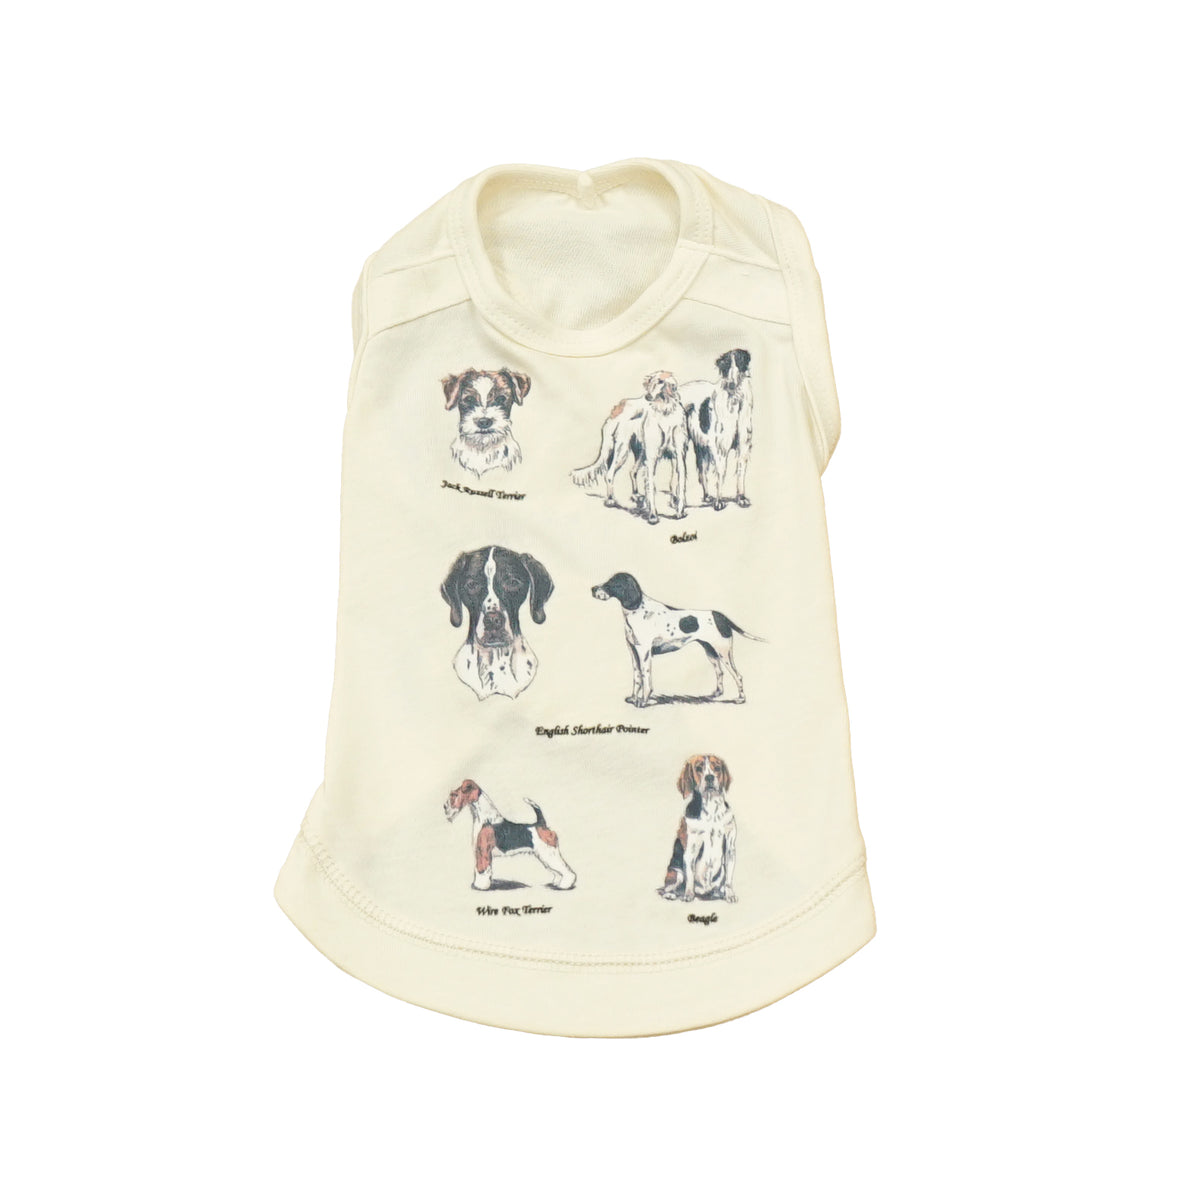 sumif | British Dogs Tank Top For Dog（ドッグ）| 犬用タンクトップ – sumif_official